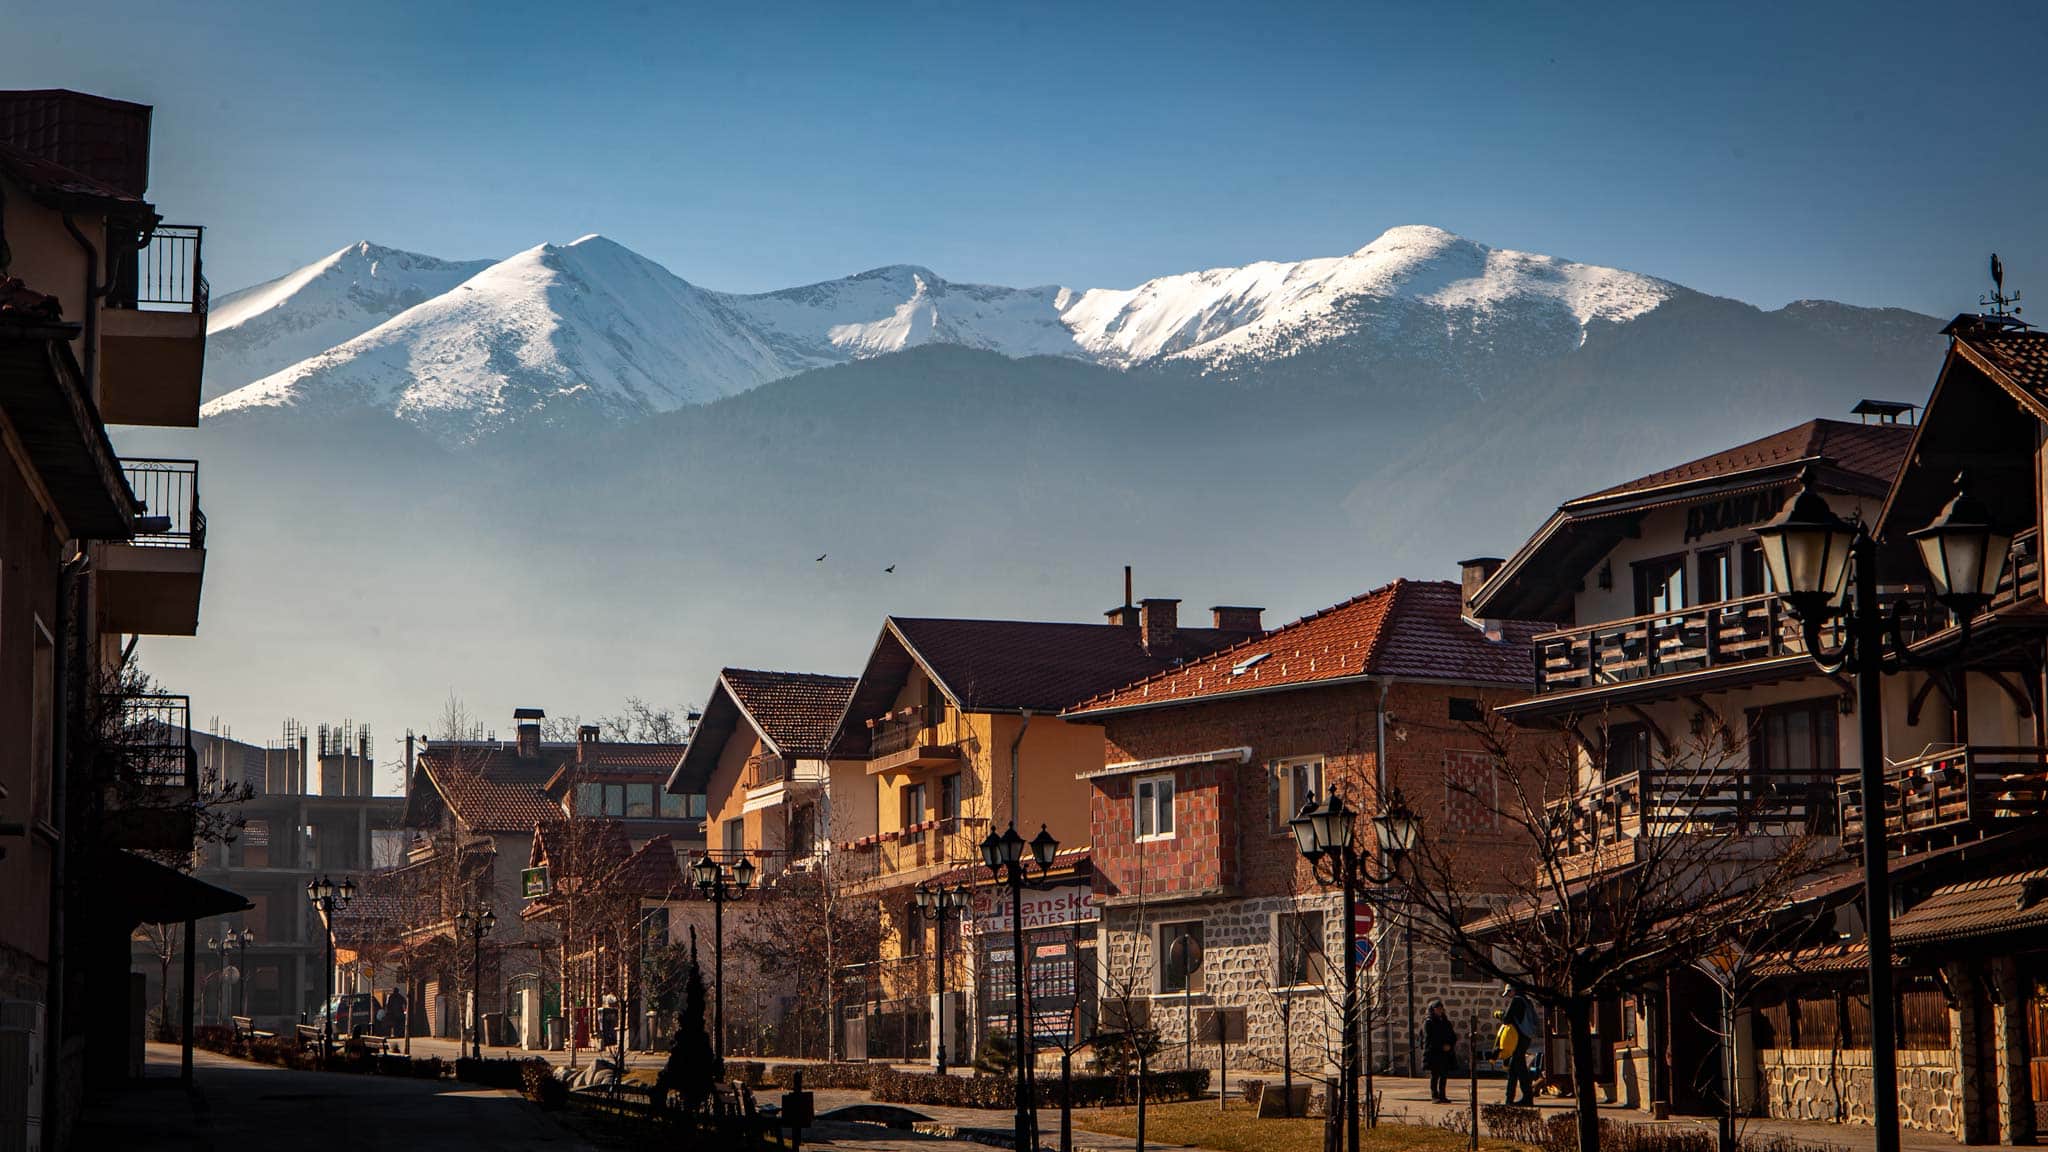 The view of old town Bansko and the snowy mountains